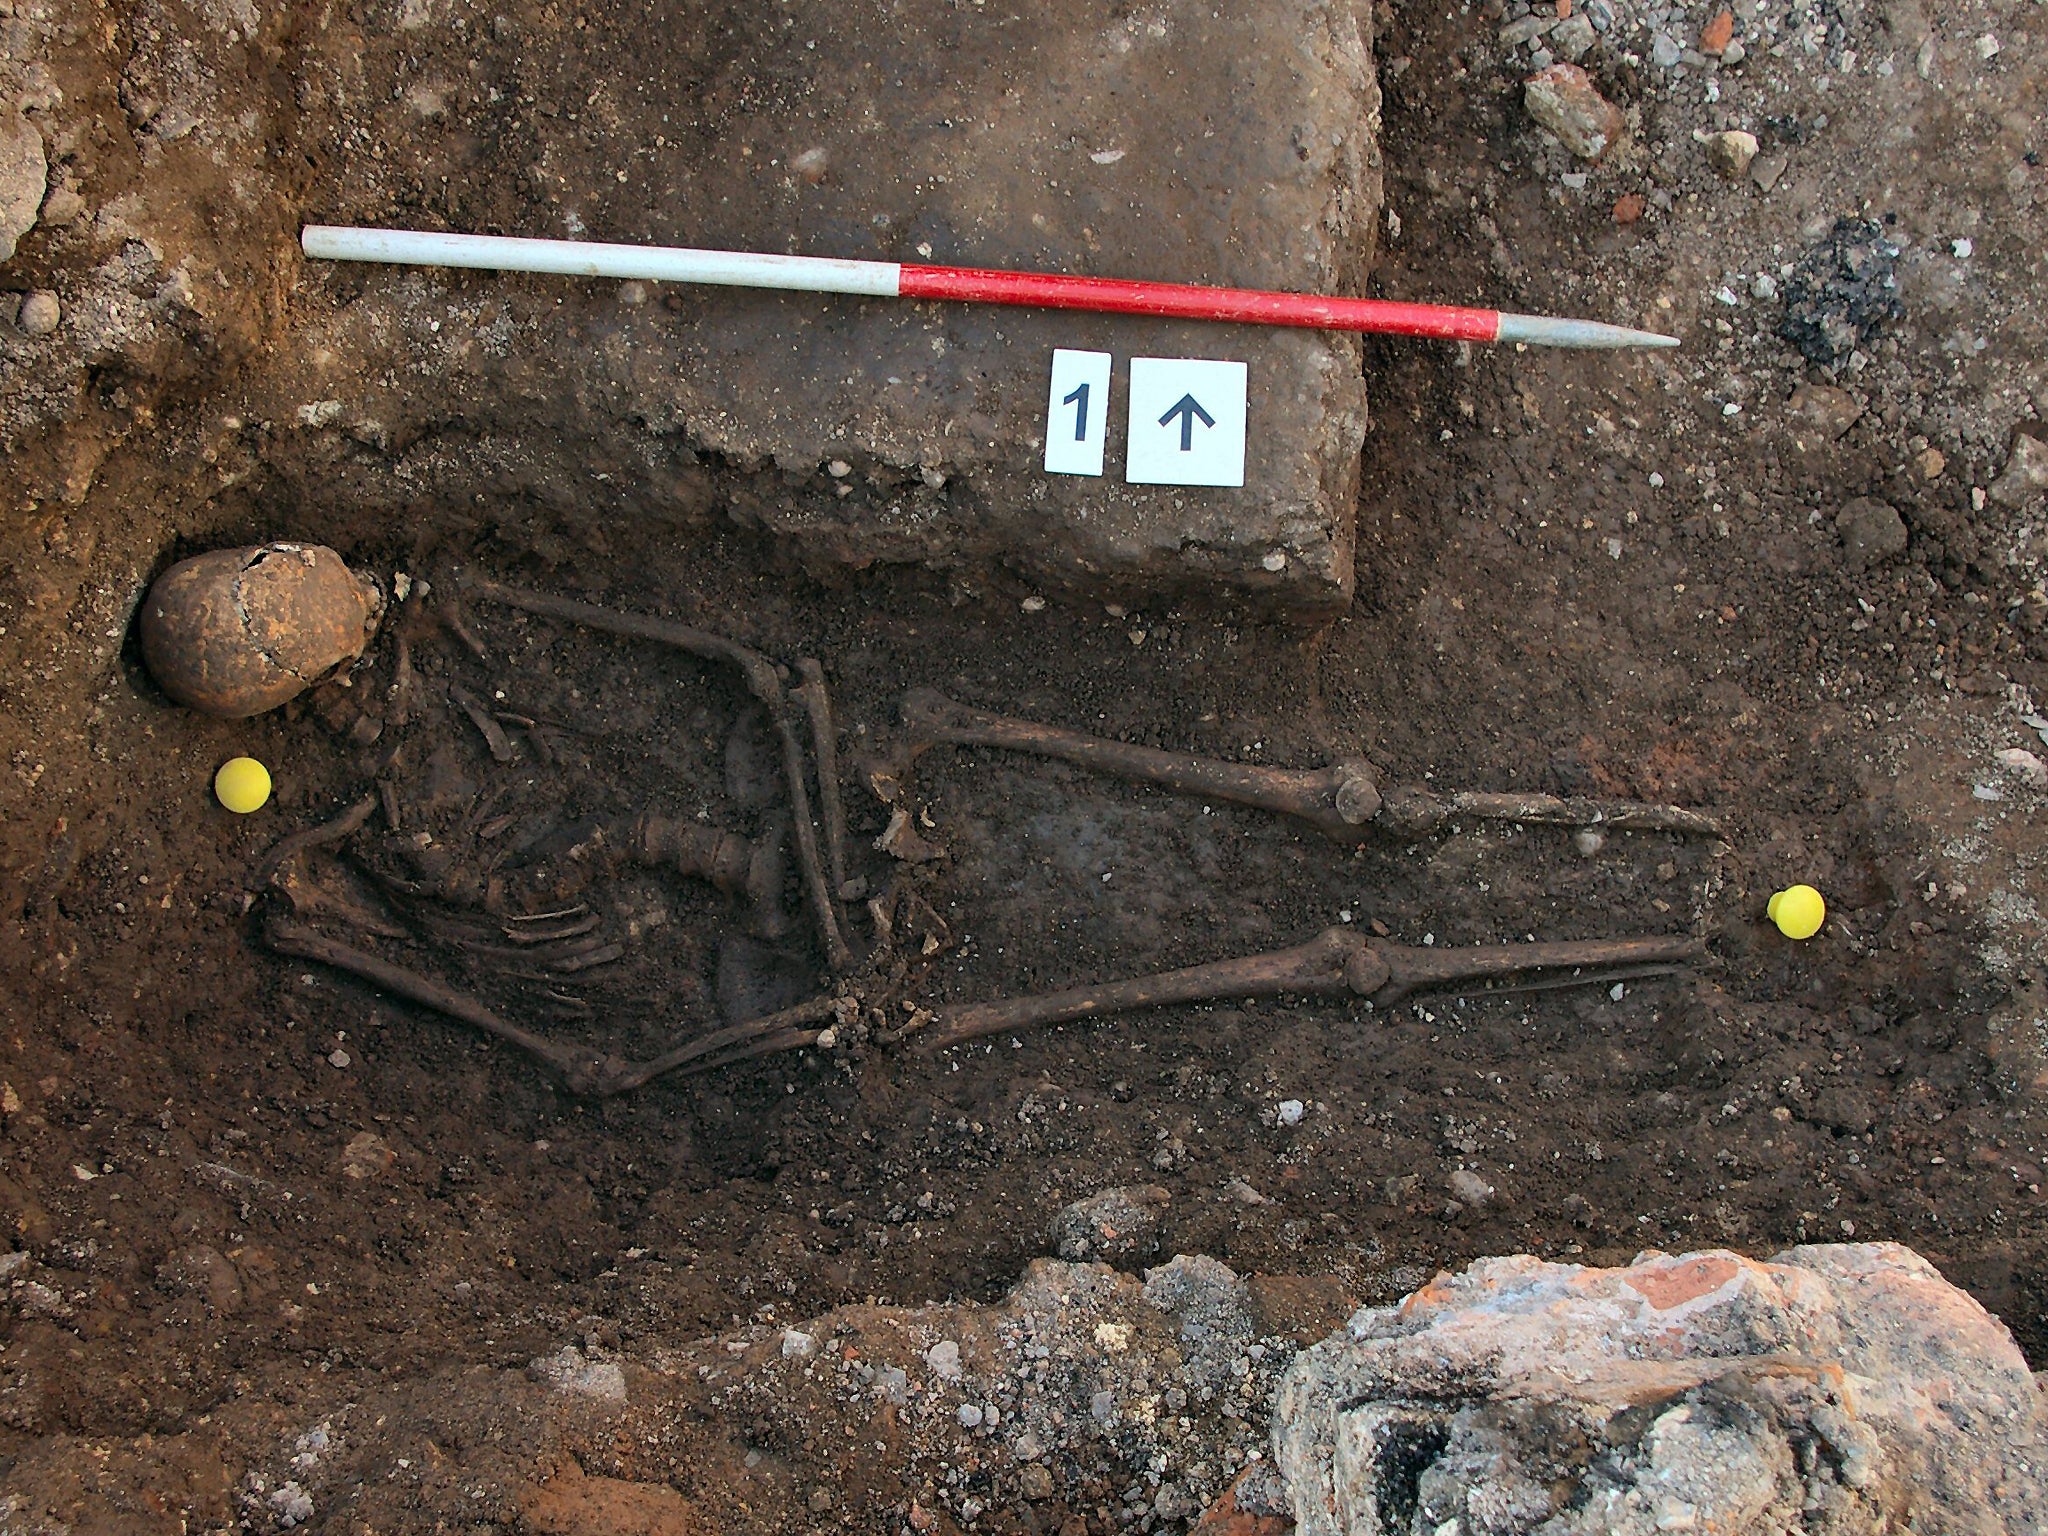 Remains found in trench one of the Grey Friars dig